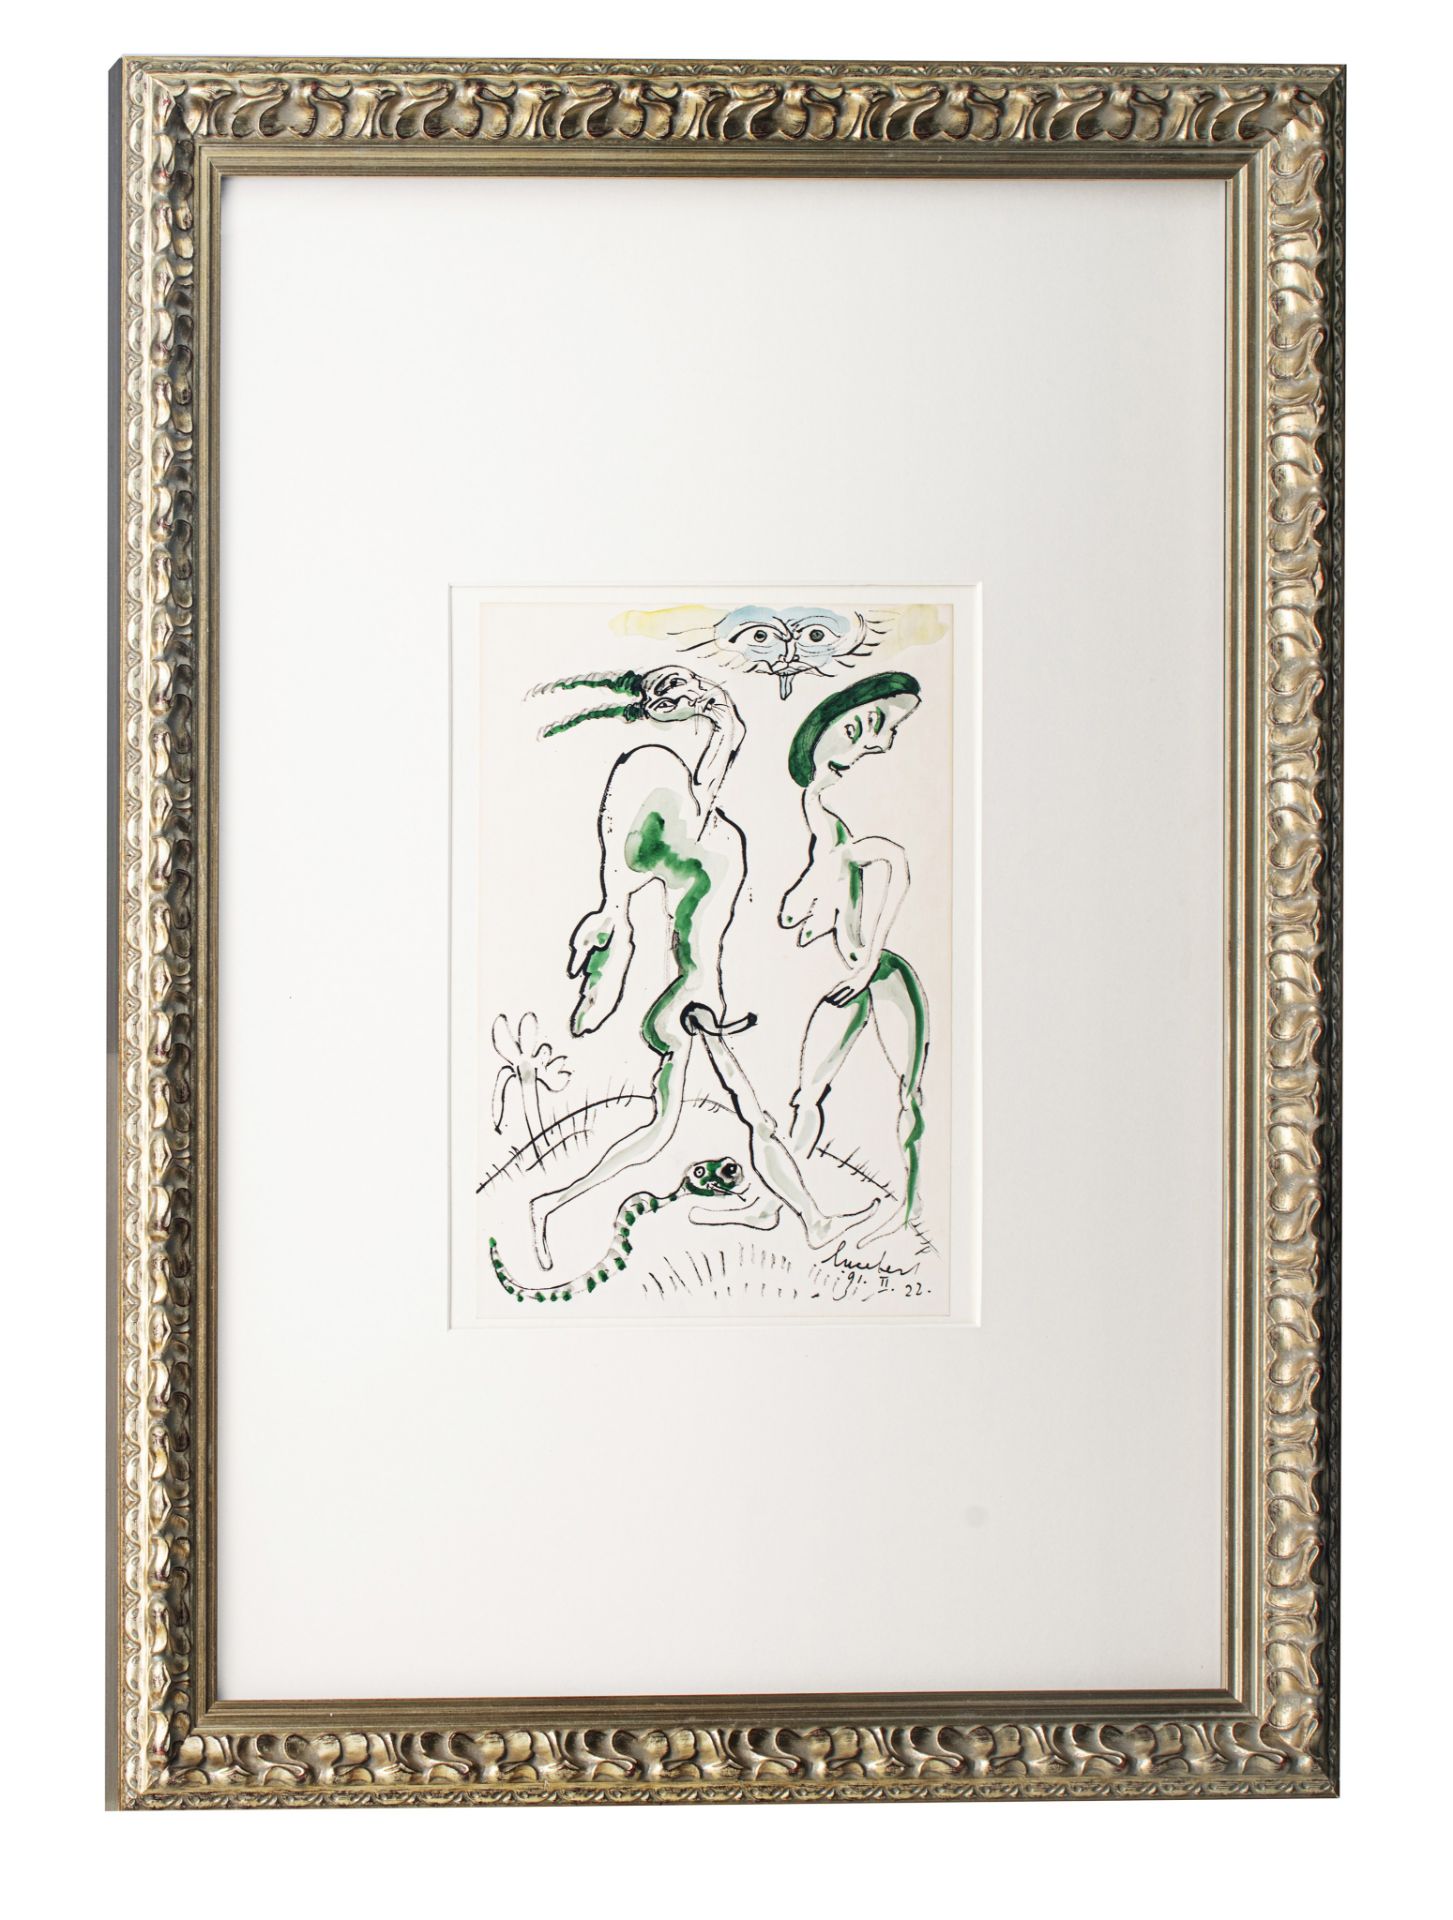 Lucebert (1924-1994), untitled, 1991, ink and watercolour on paper, 23 x 32,5 cm - Image 2 of 5